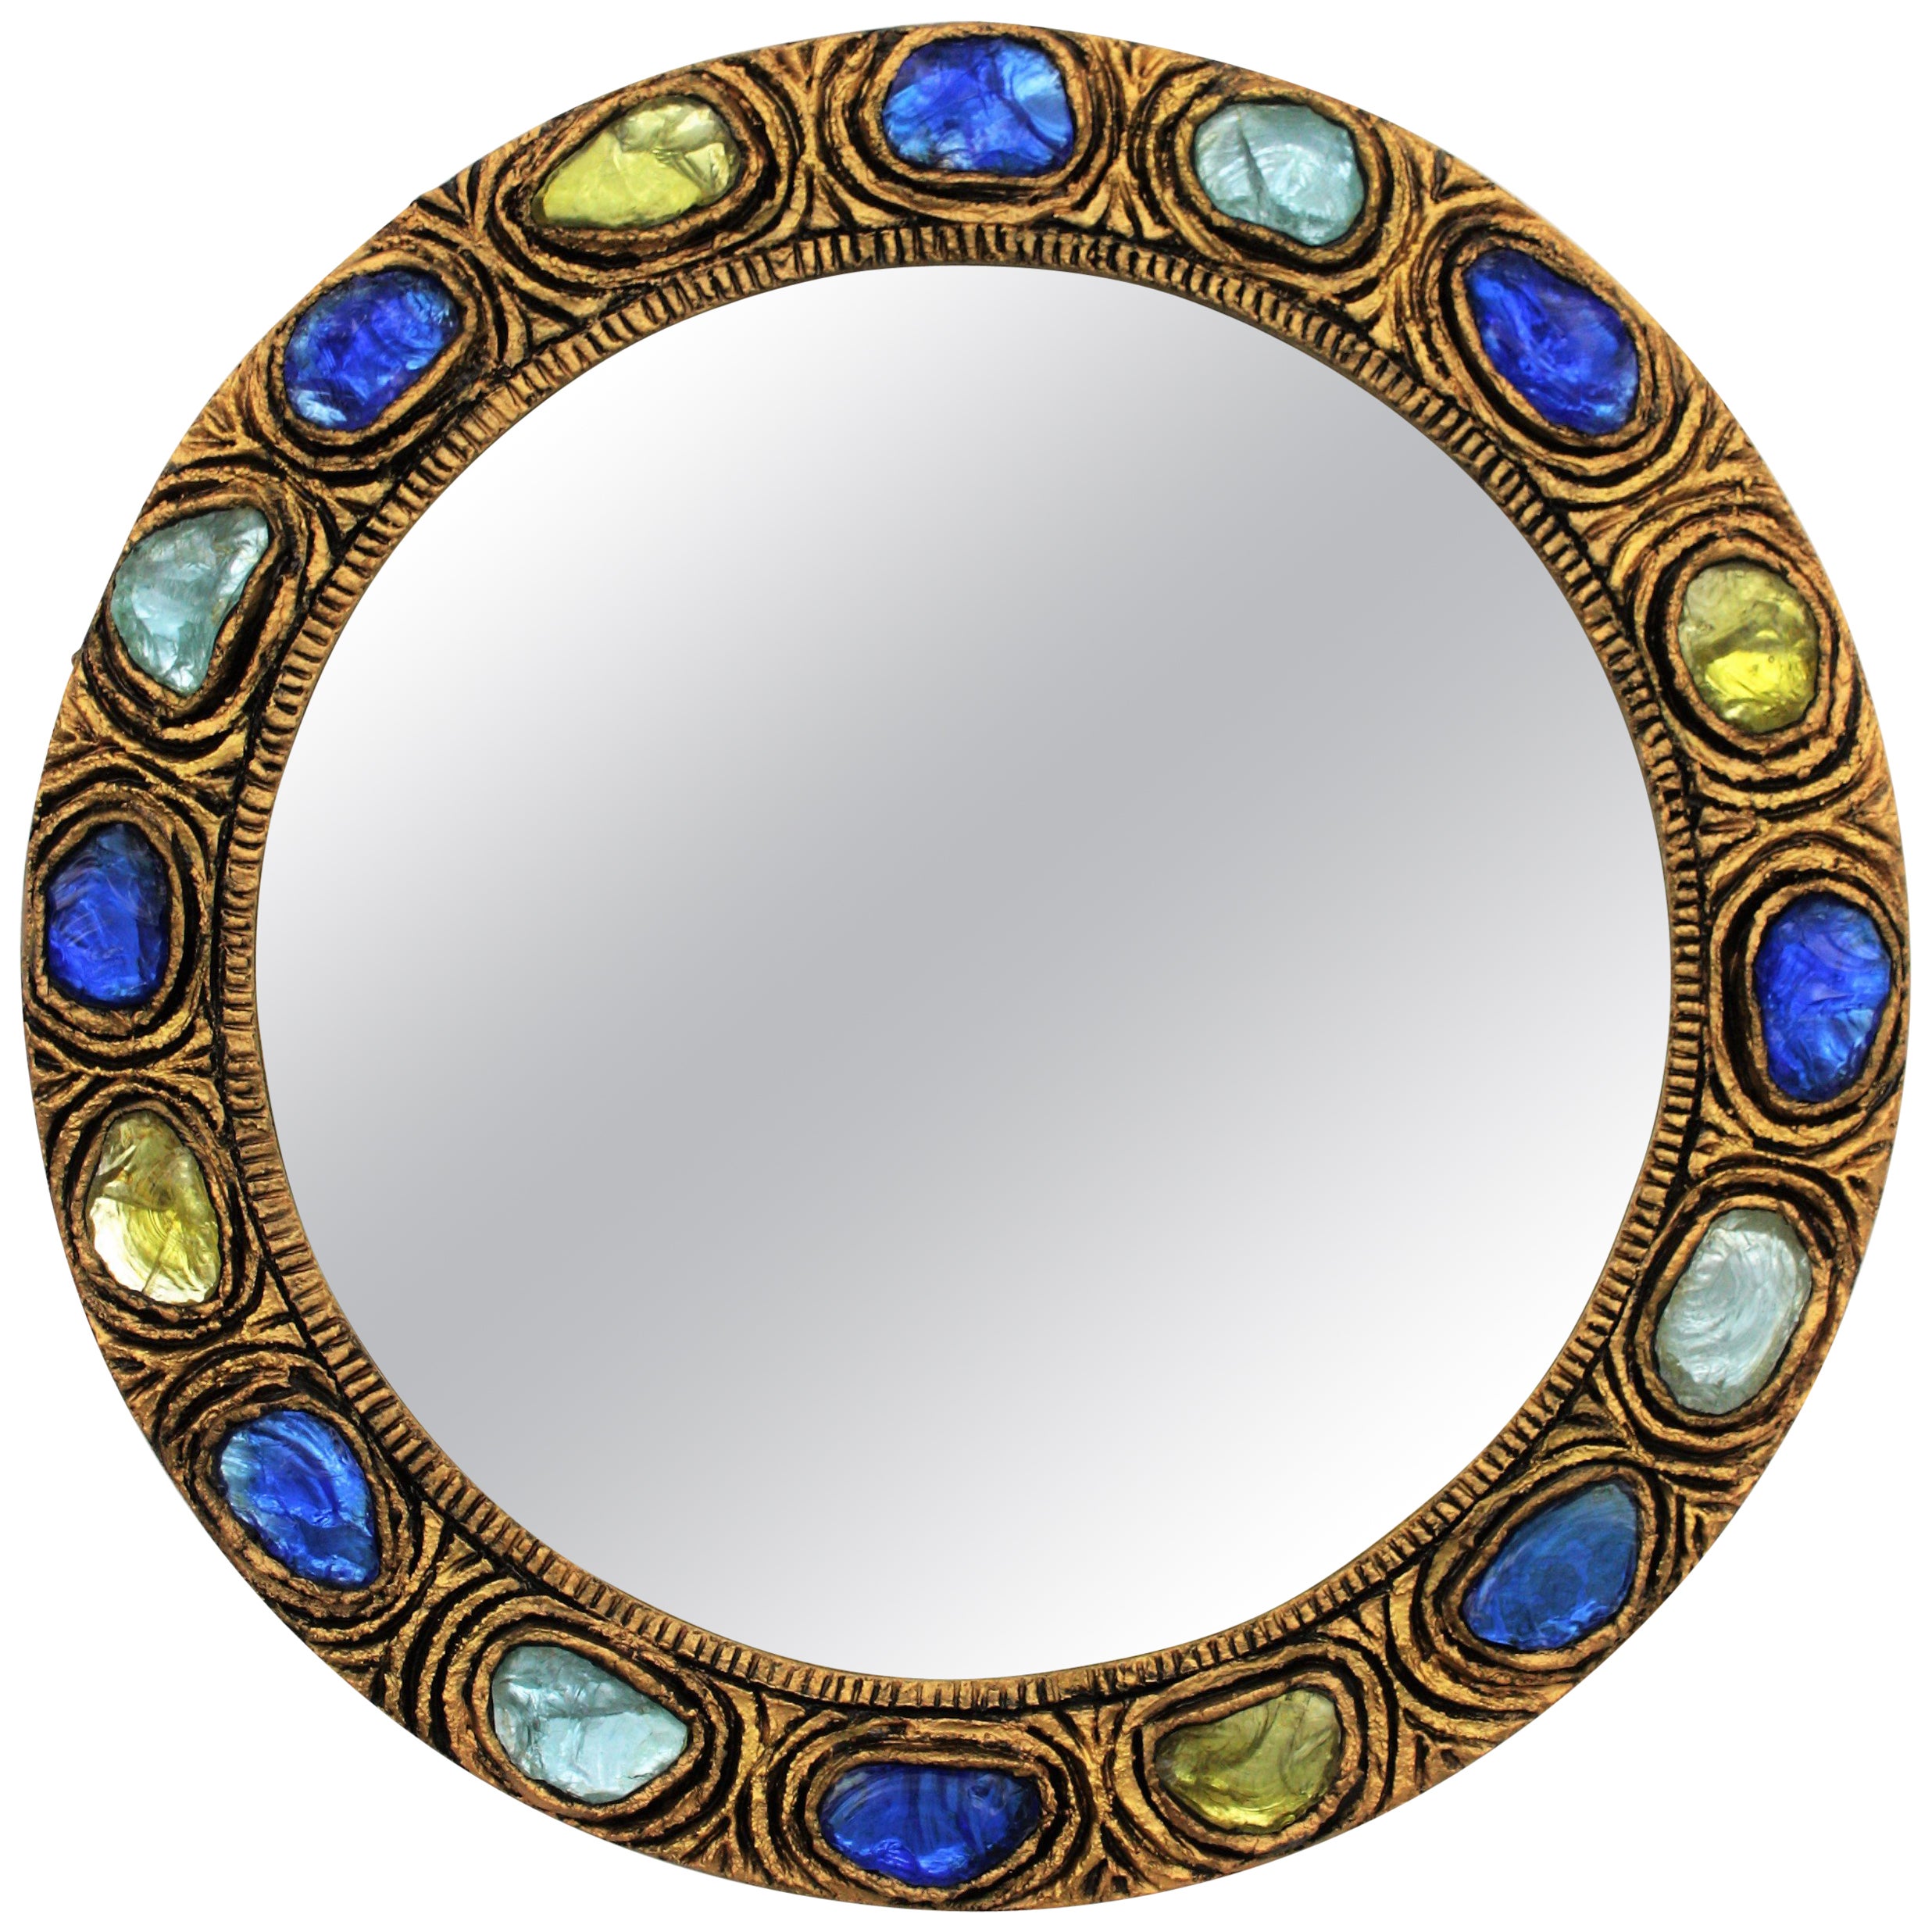 Round Wall Mirror with Blue, Yellow and Turquoise Rock Crystals